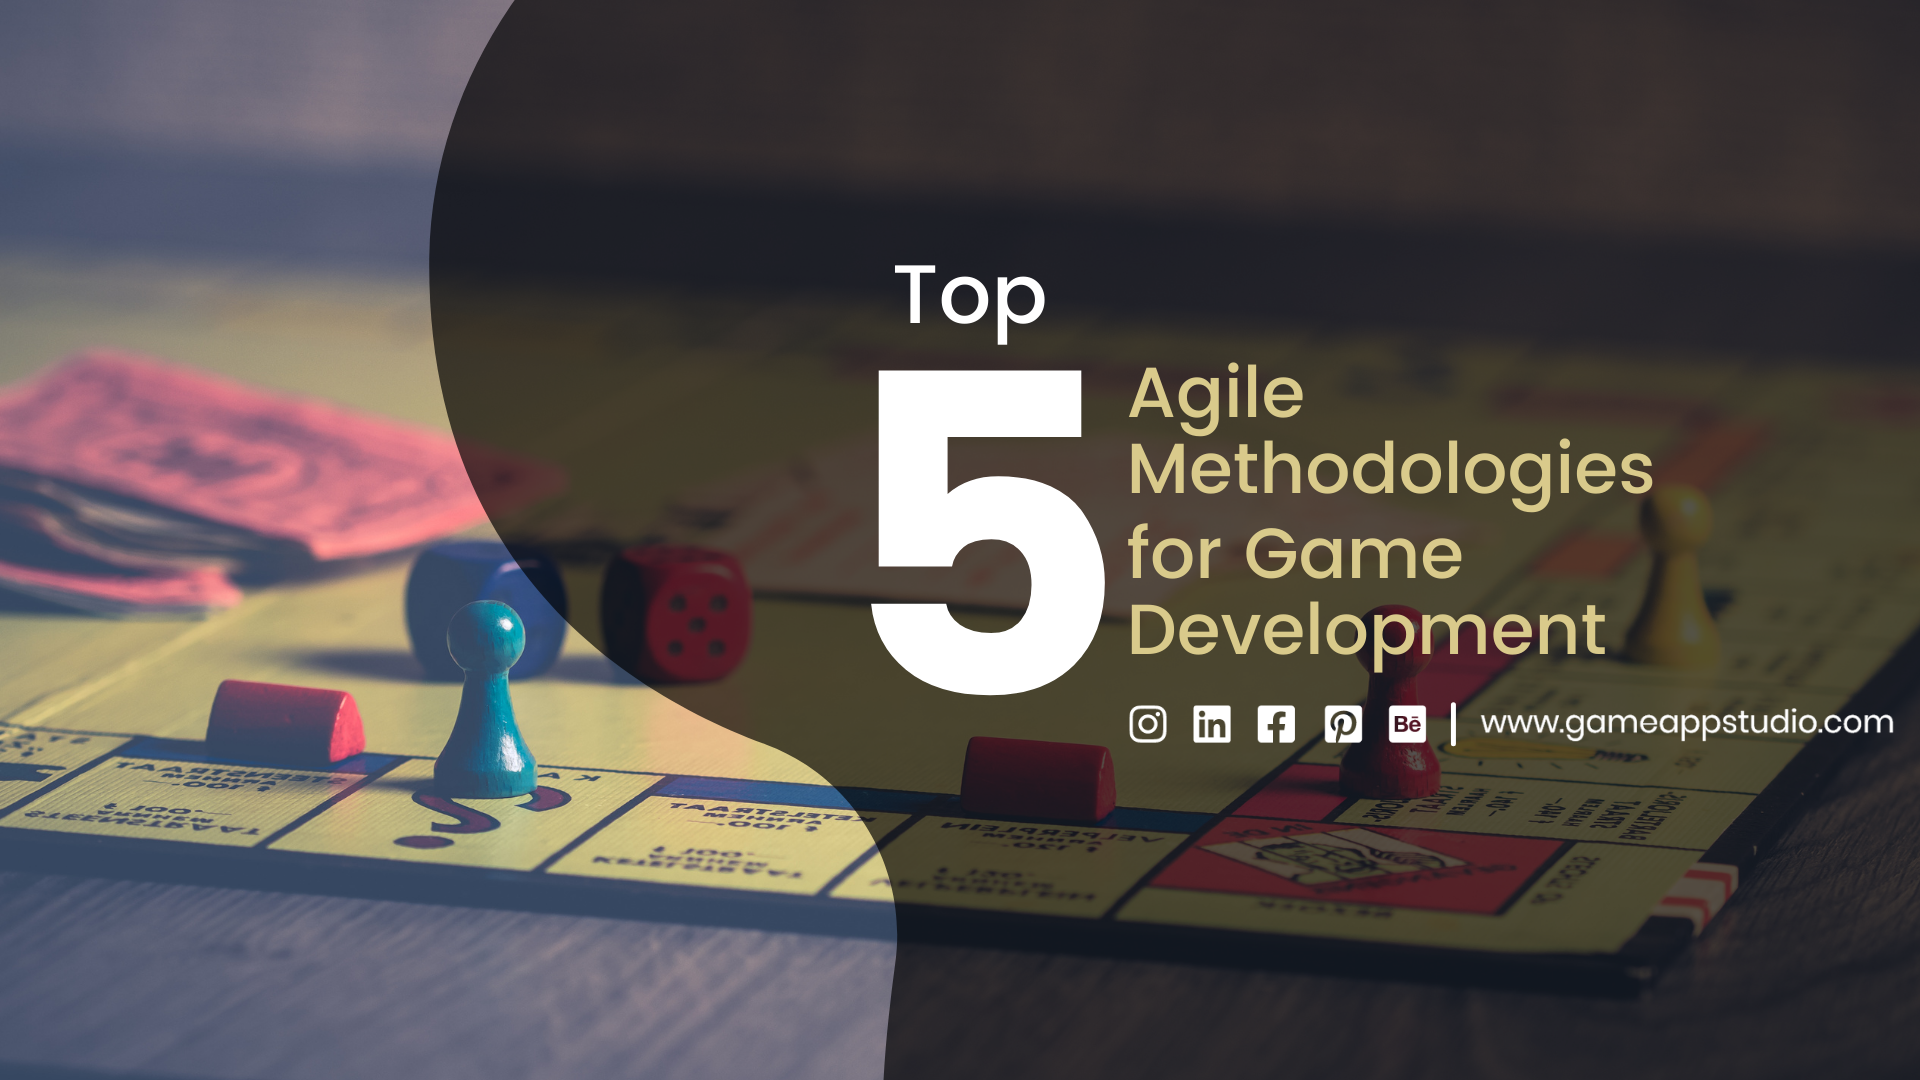 What are the Top Agile Methodologies that customers want you to choose for Game Development